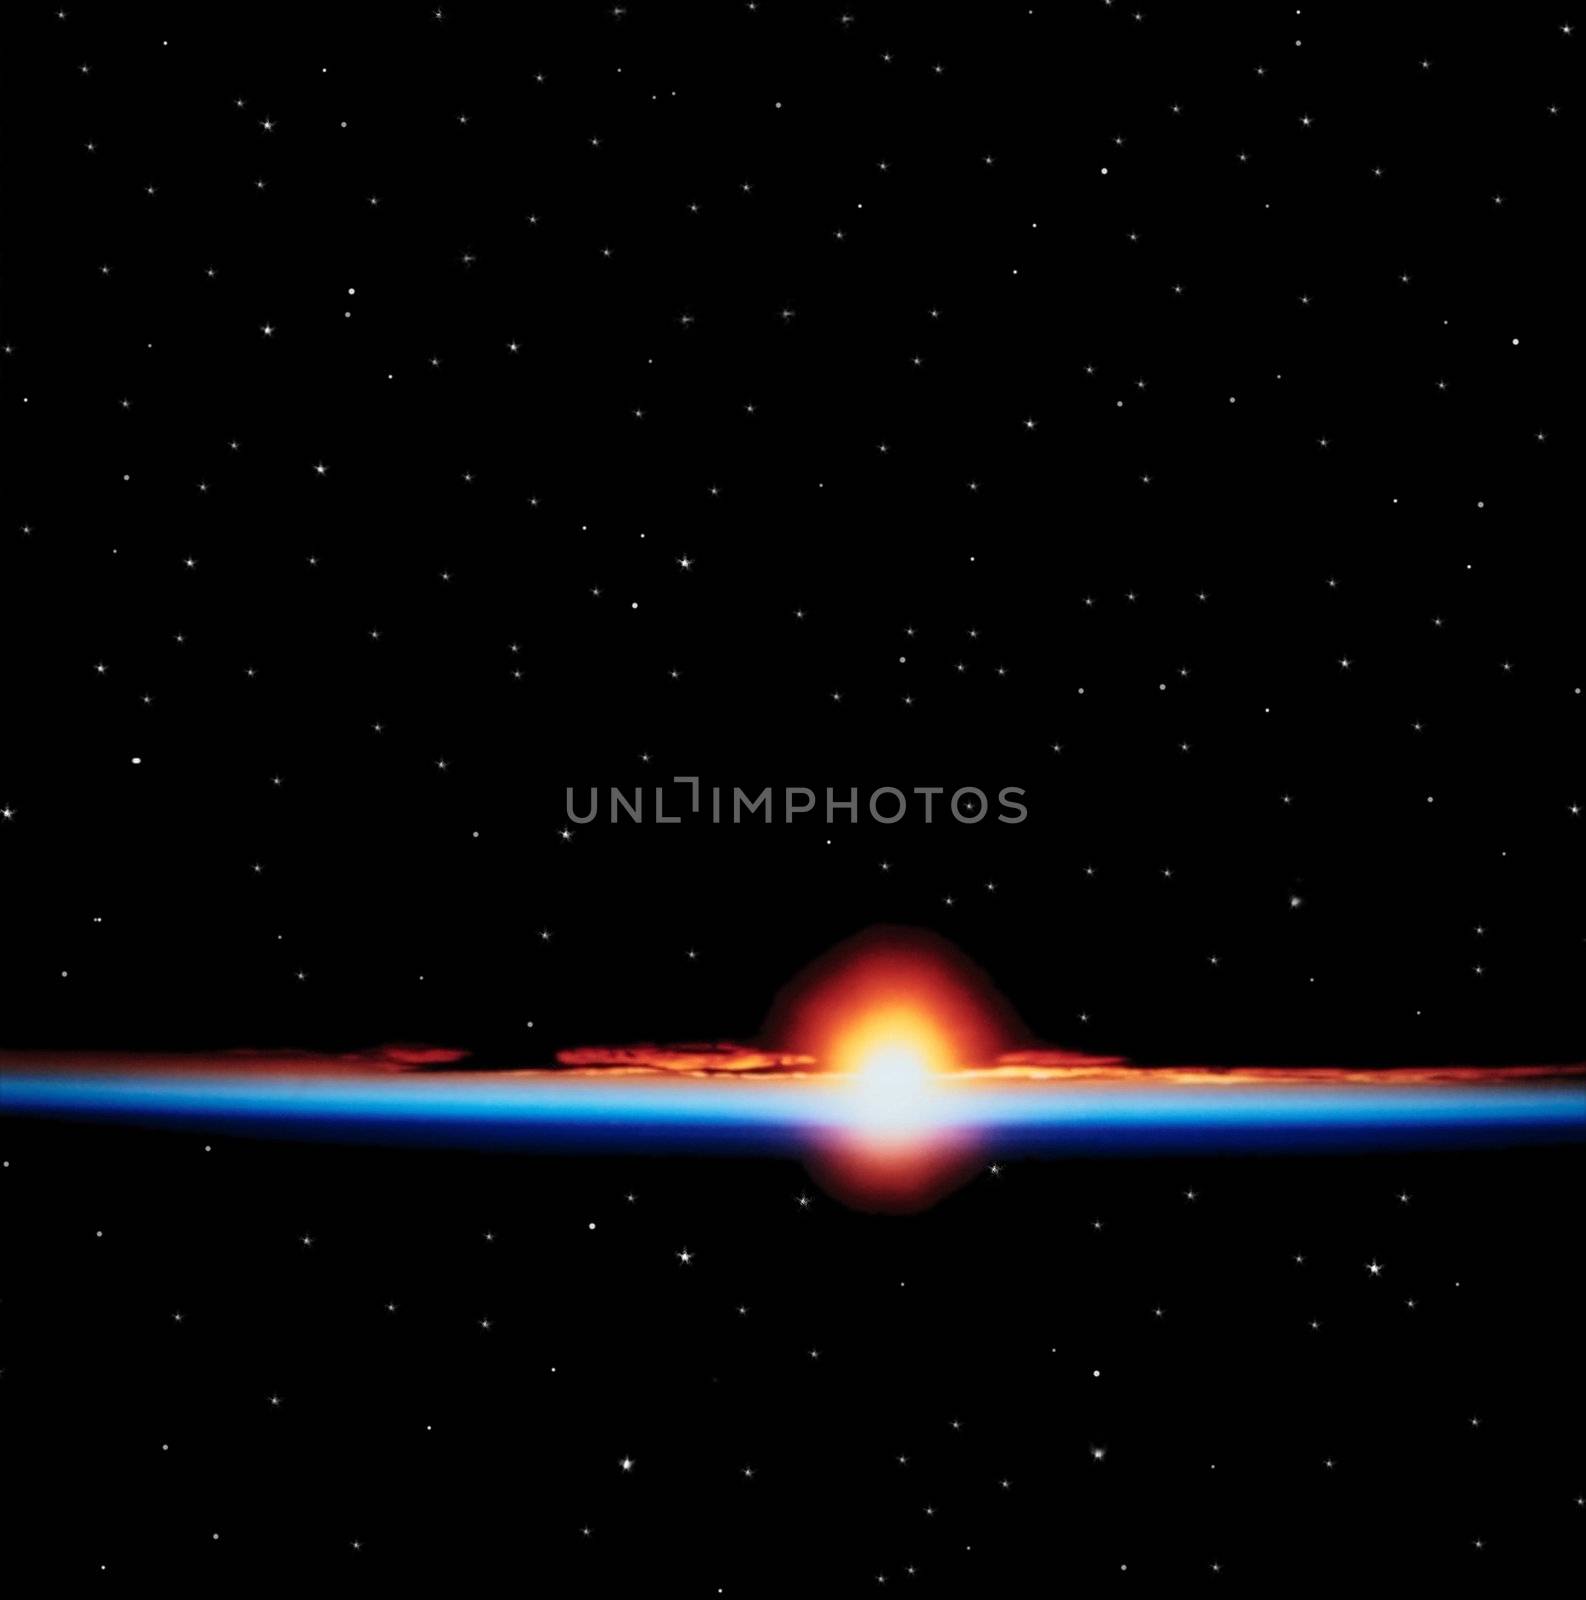 a simulation of an exploding star or planet